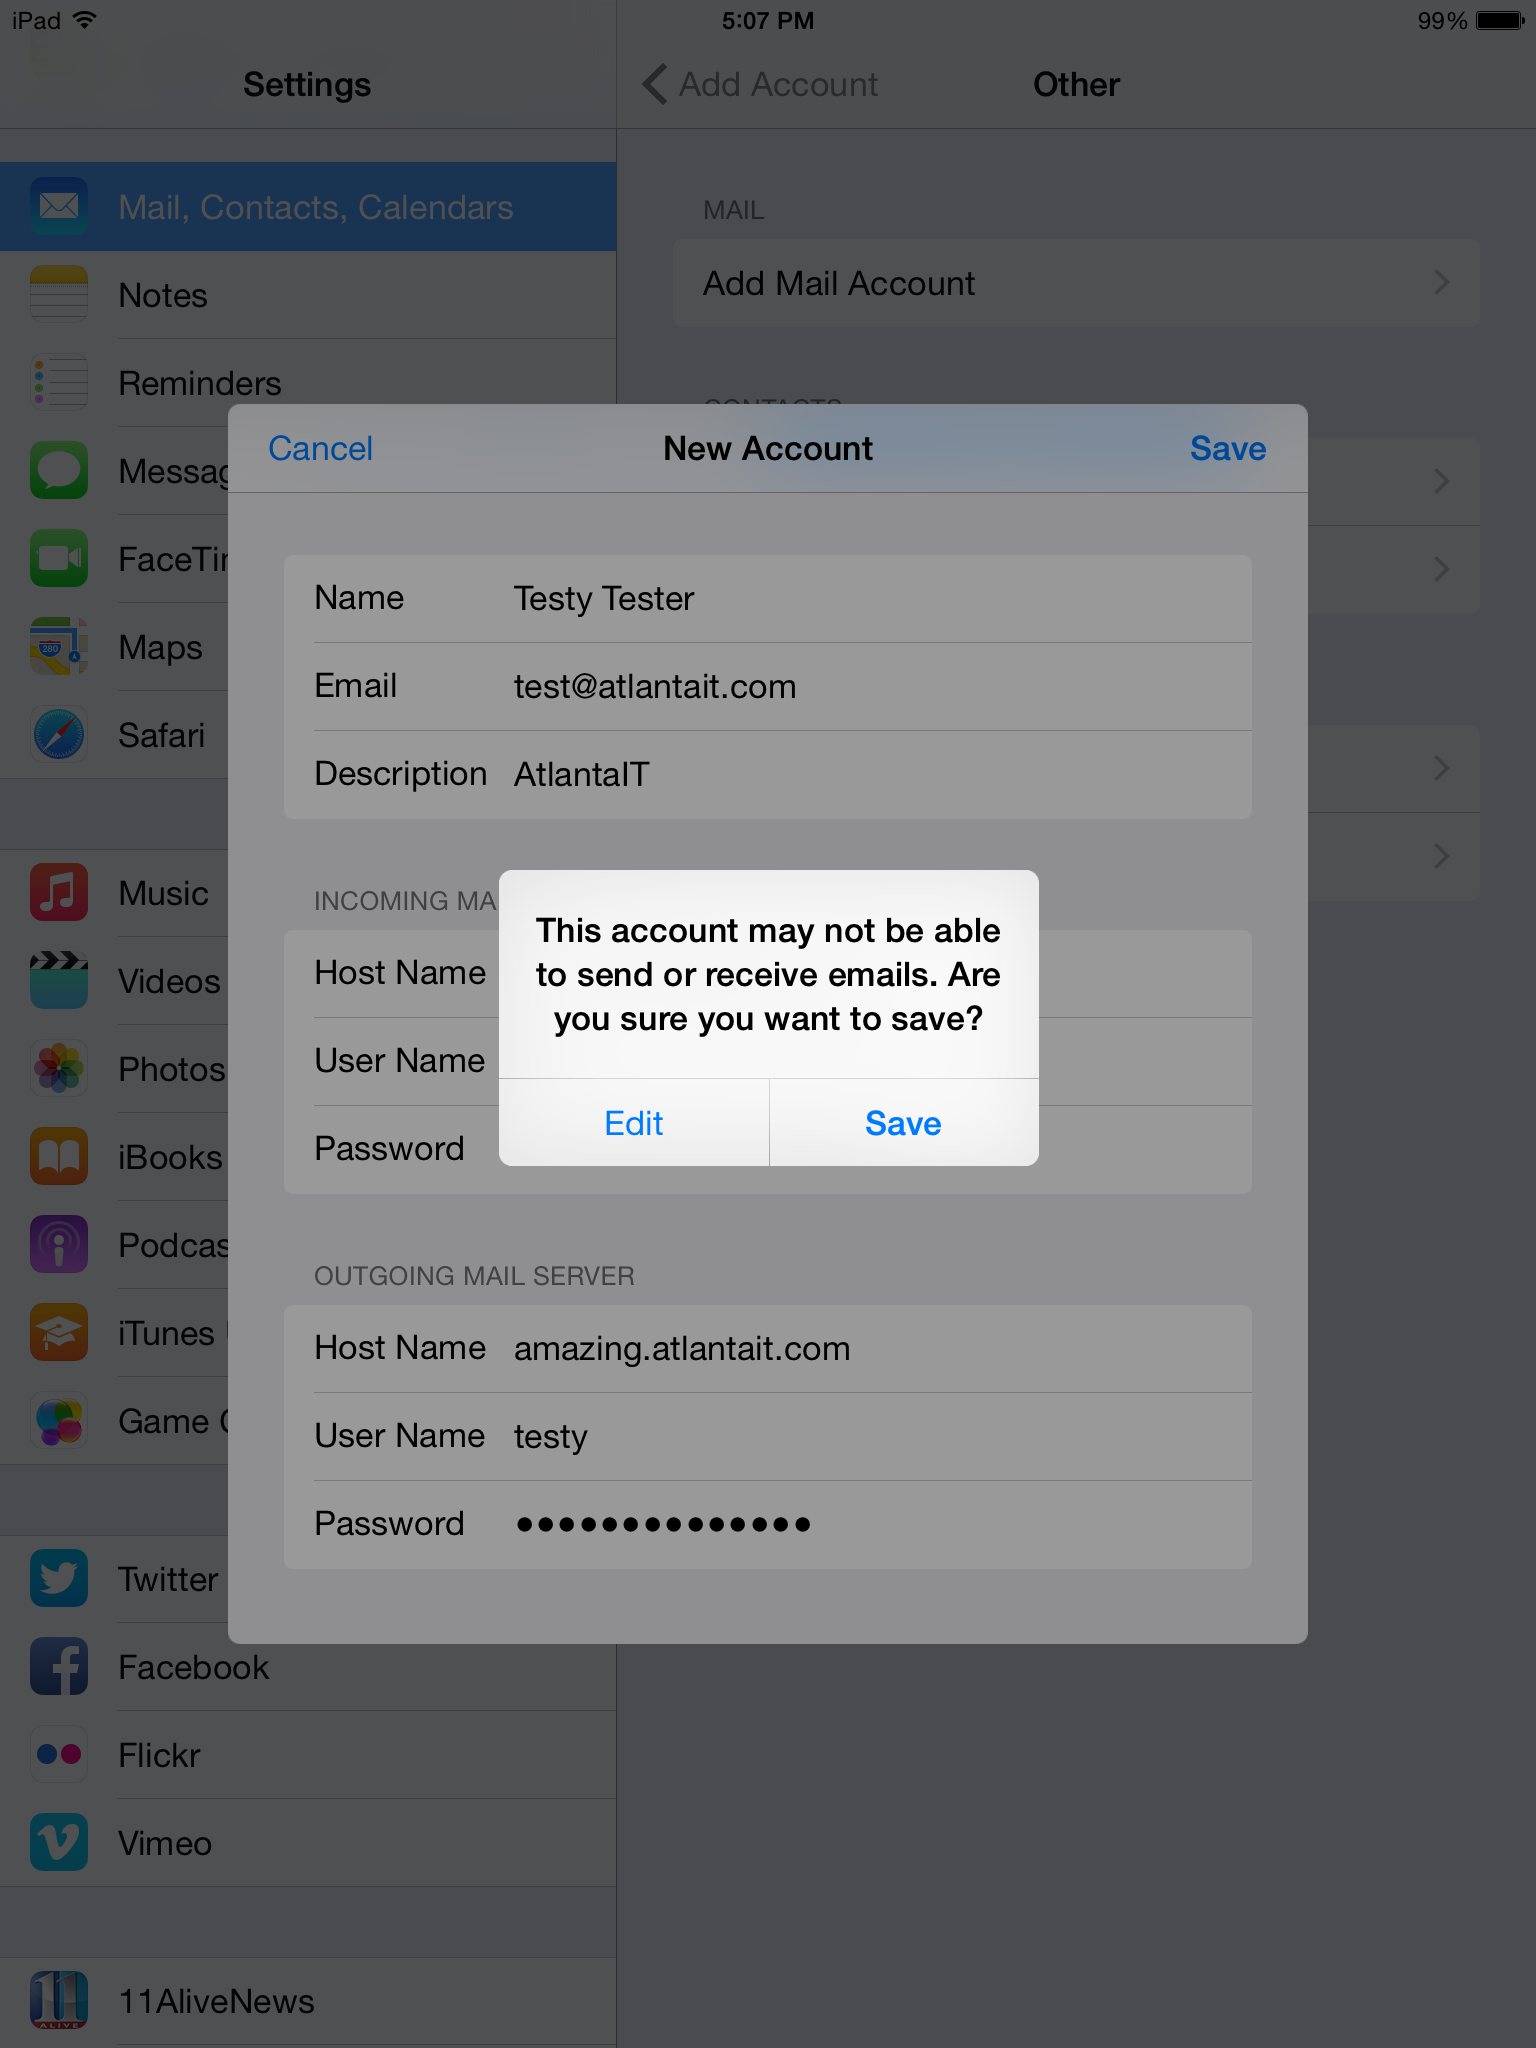 Adding Email Account on the iPad Air 2